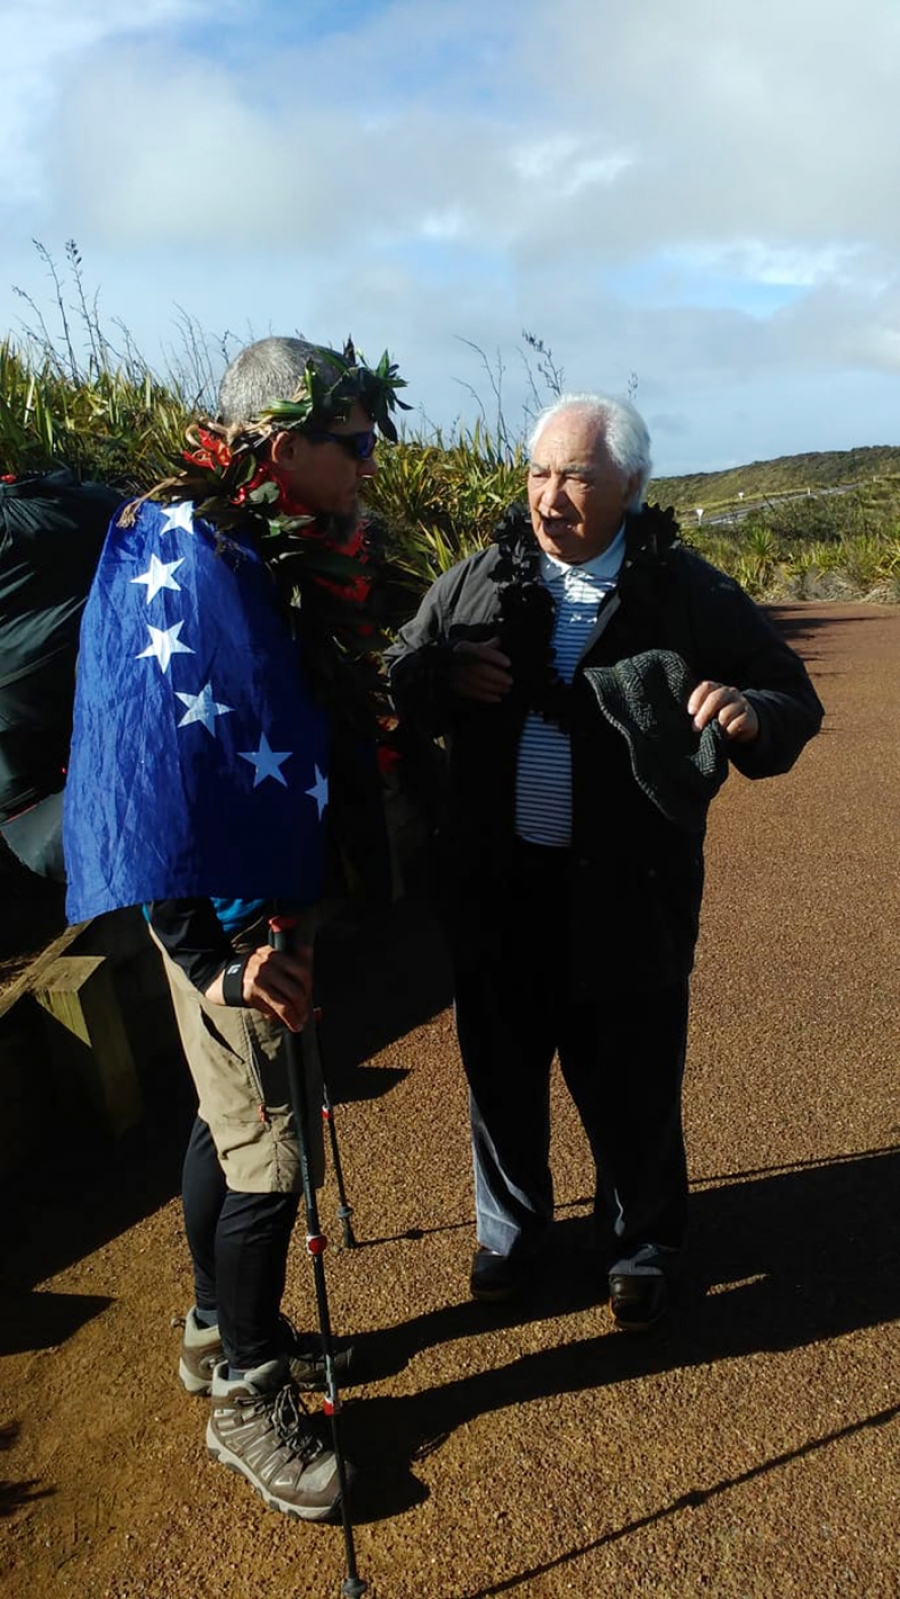 Day 135: Triumphant Talbot reaches New Zealand’s northernmost tip